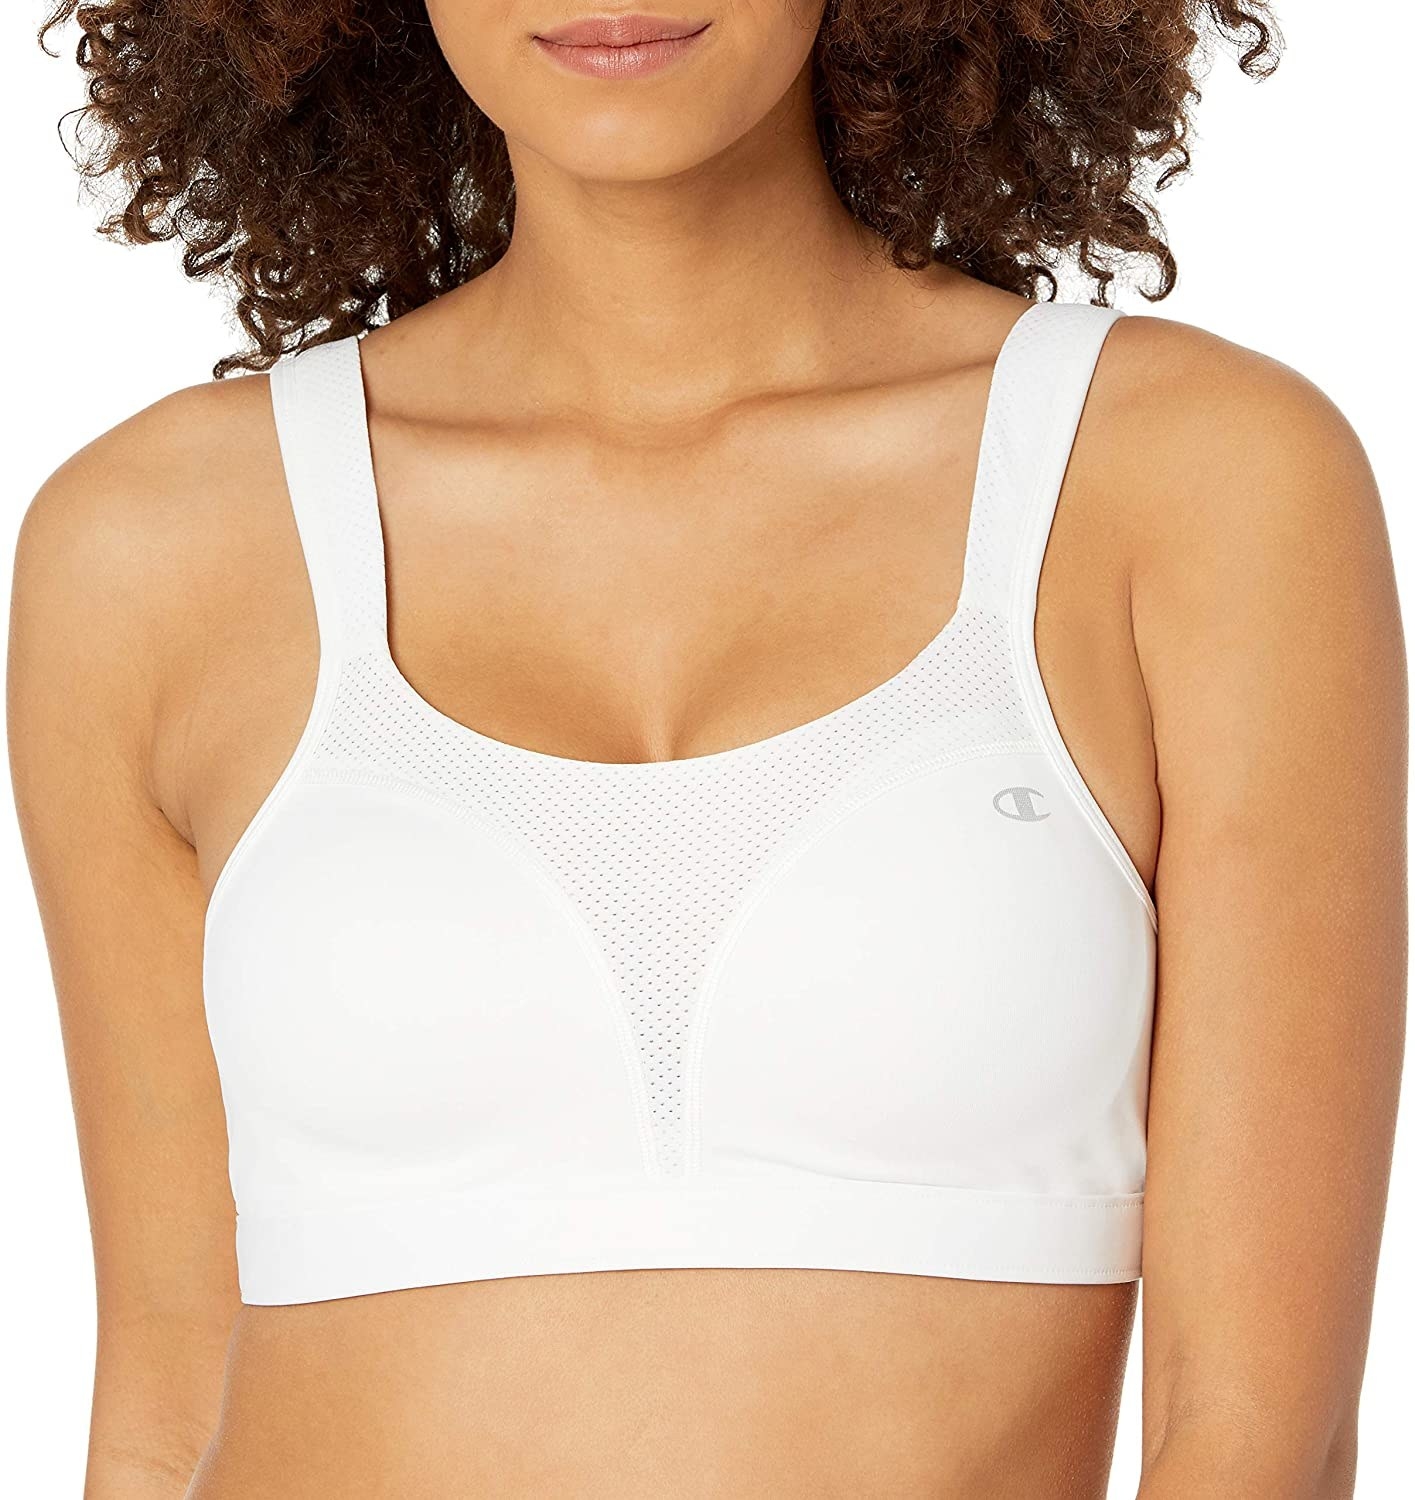 I'm a DDD—These Are the 5 Best Bras for Big Boobs - Yahoo Sports